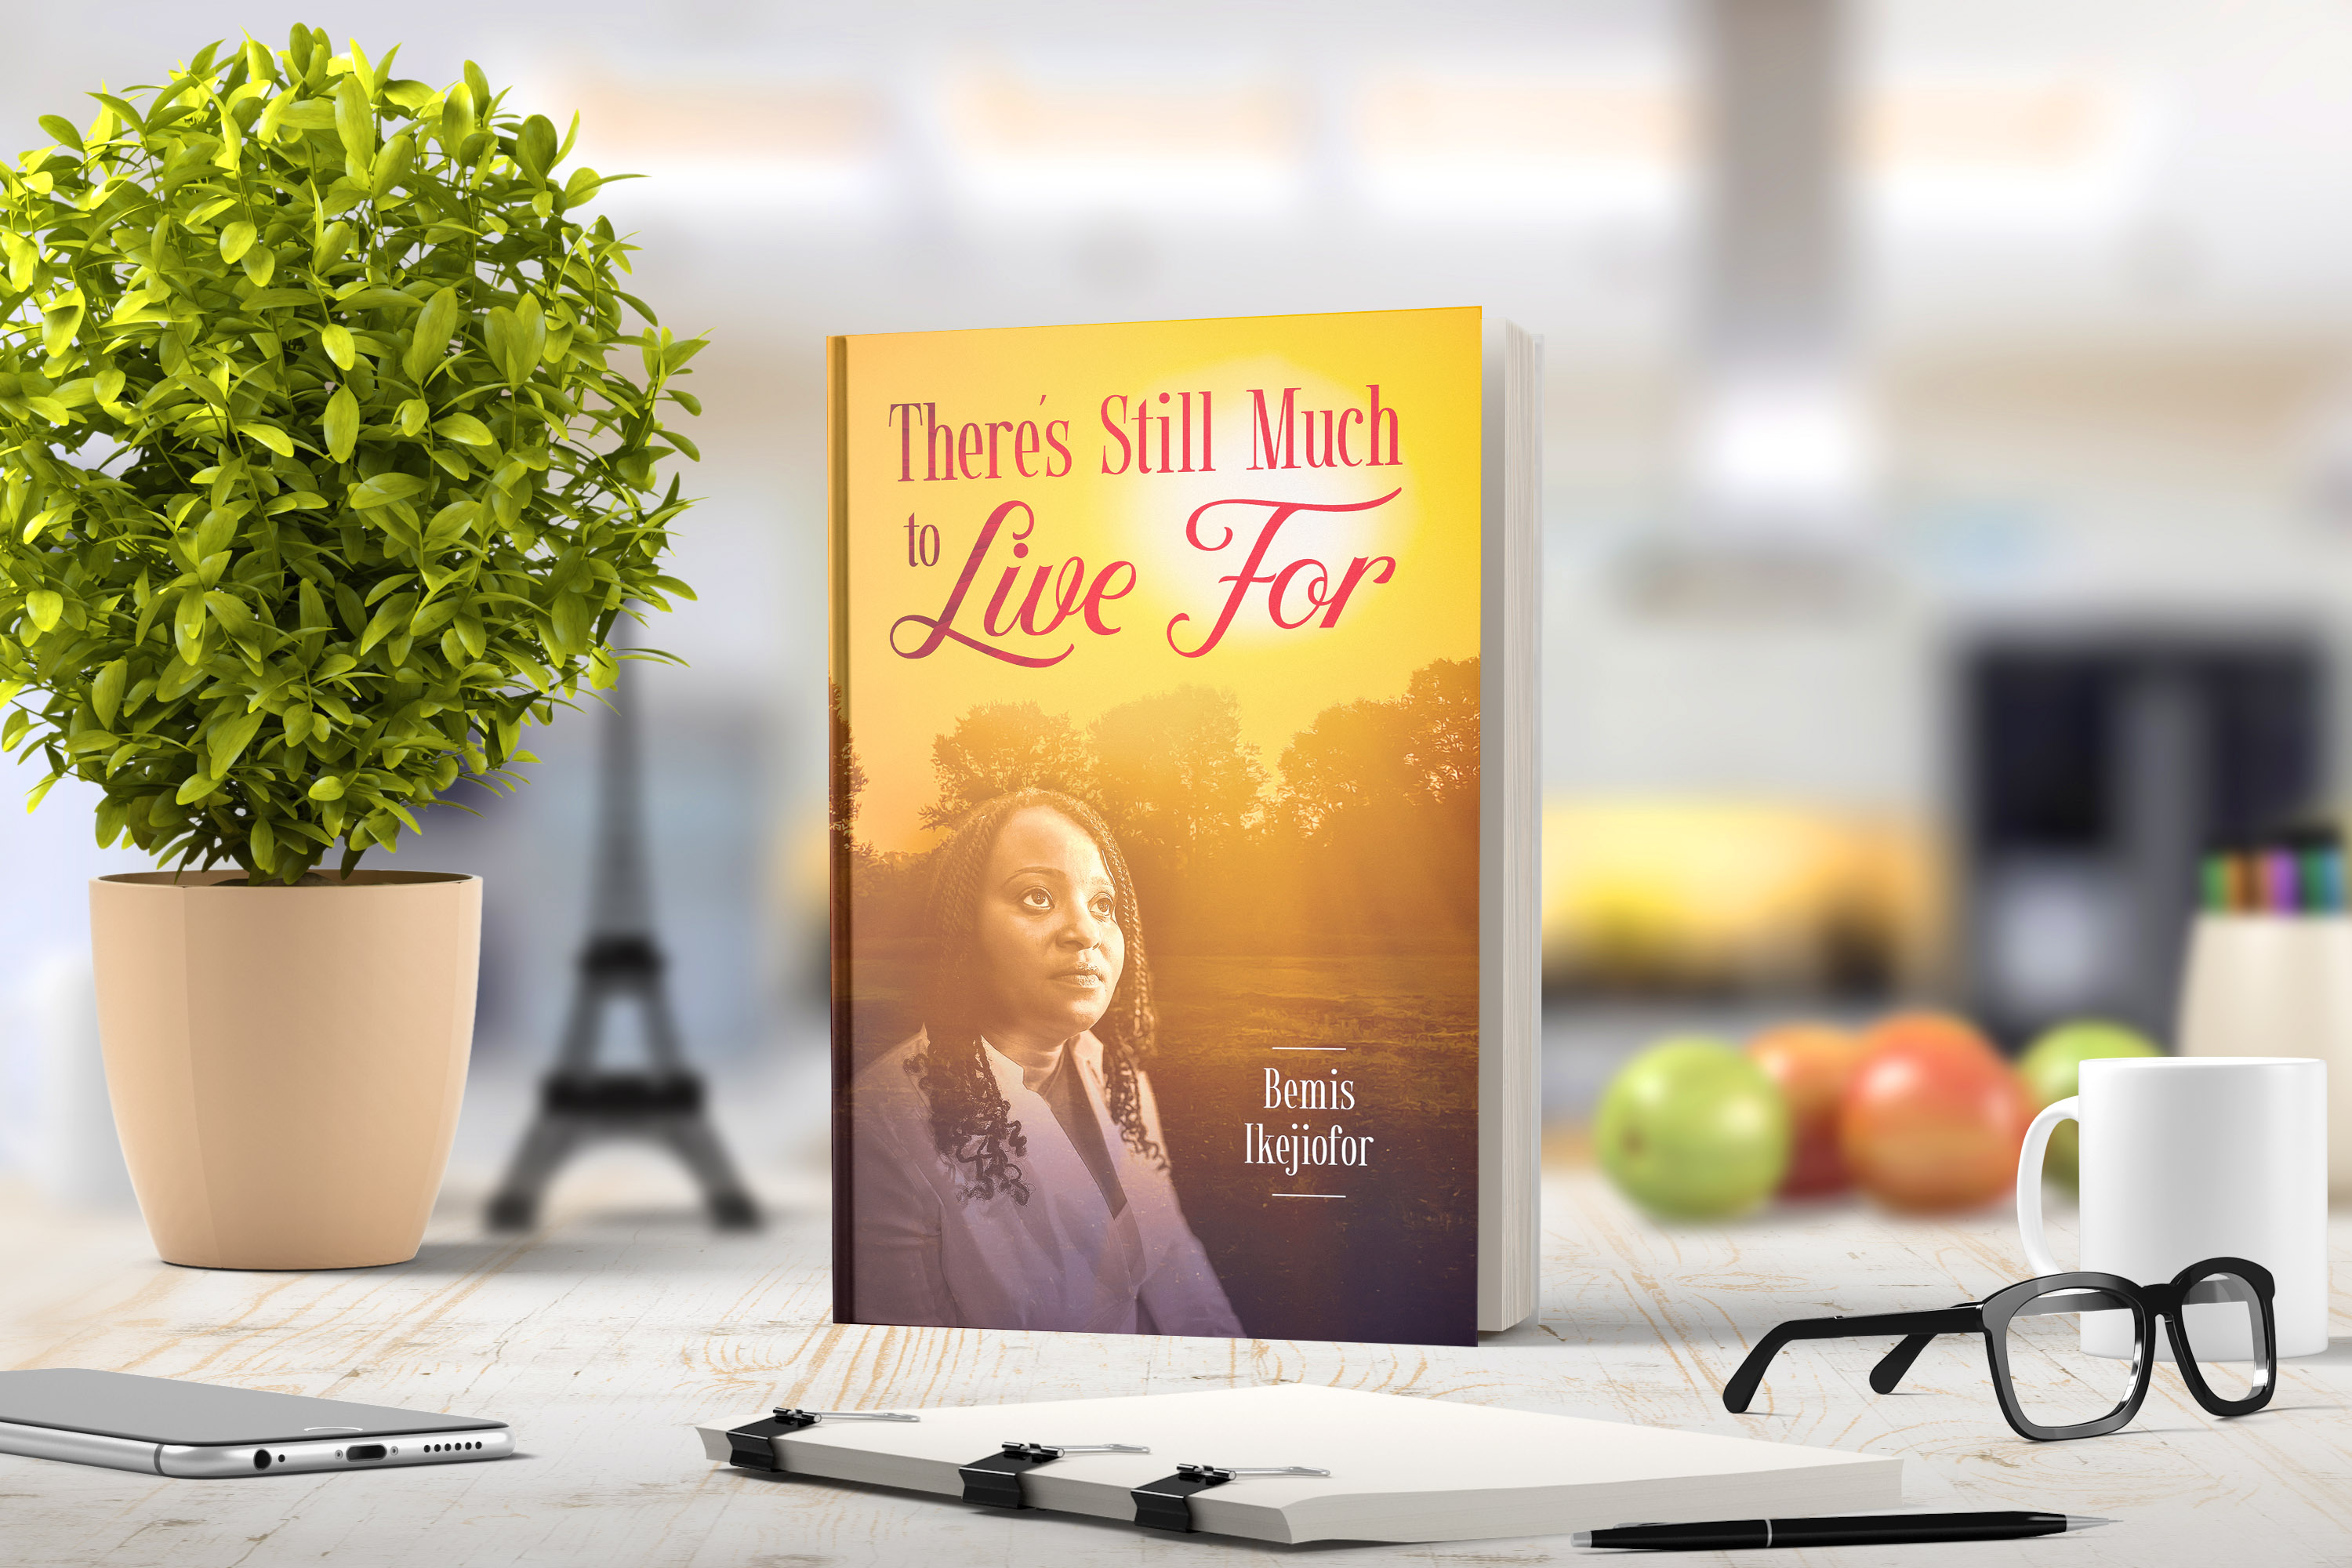 Author Bemis Ikejiofor Release Debut Book "There’s Still Much to Live For" to Rave Reviews